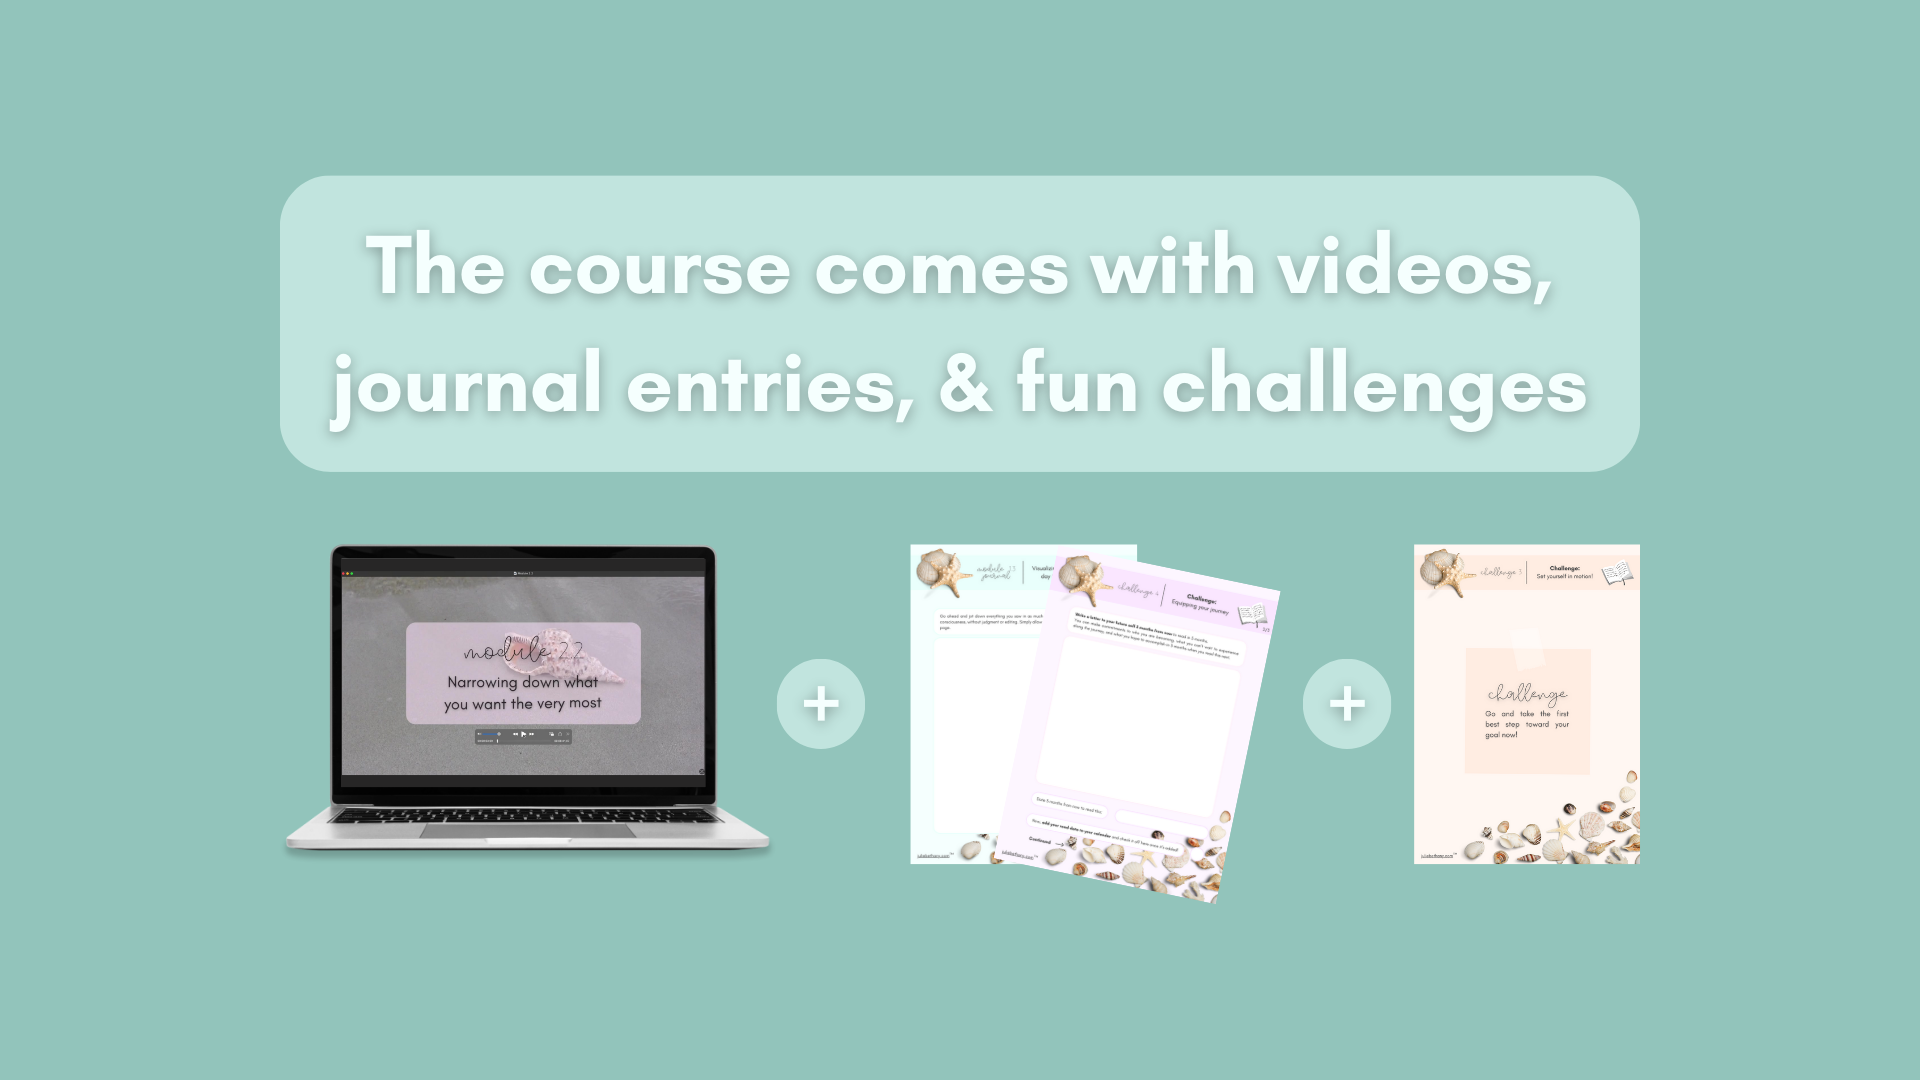 The course comes with videos, journal entries, and fun challenges